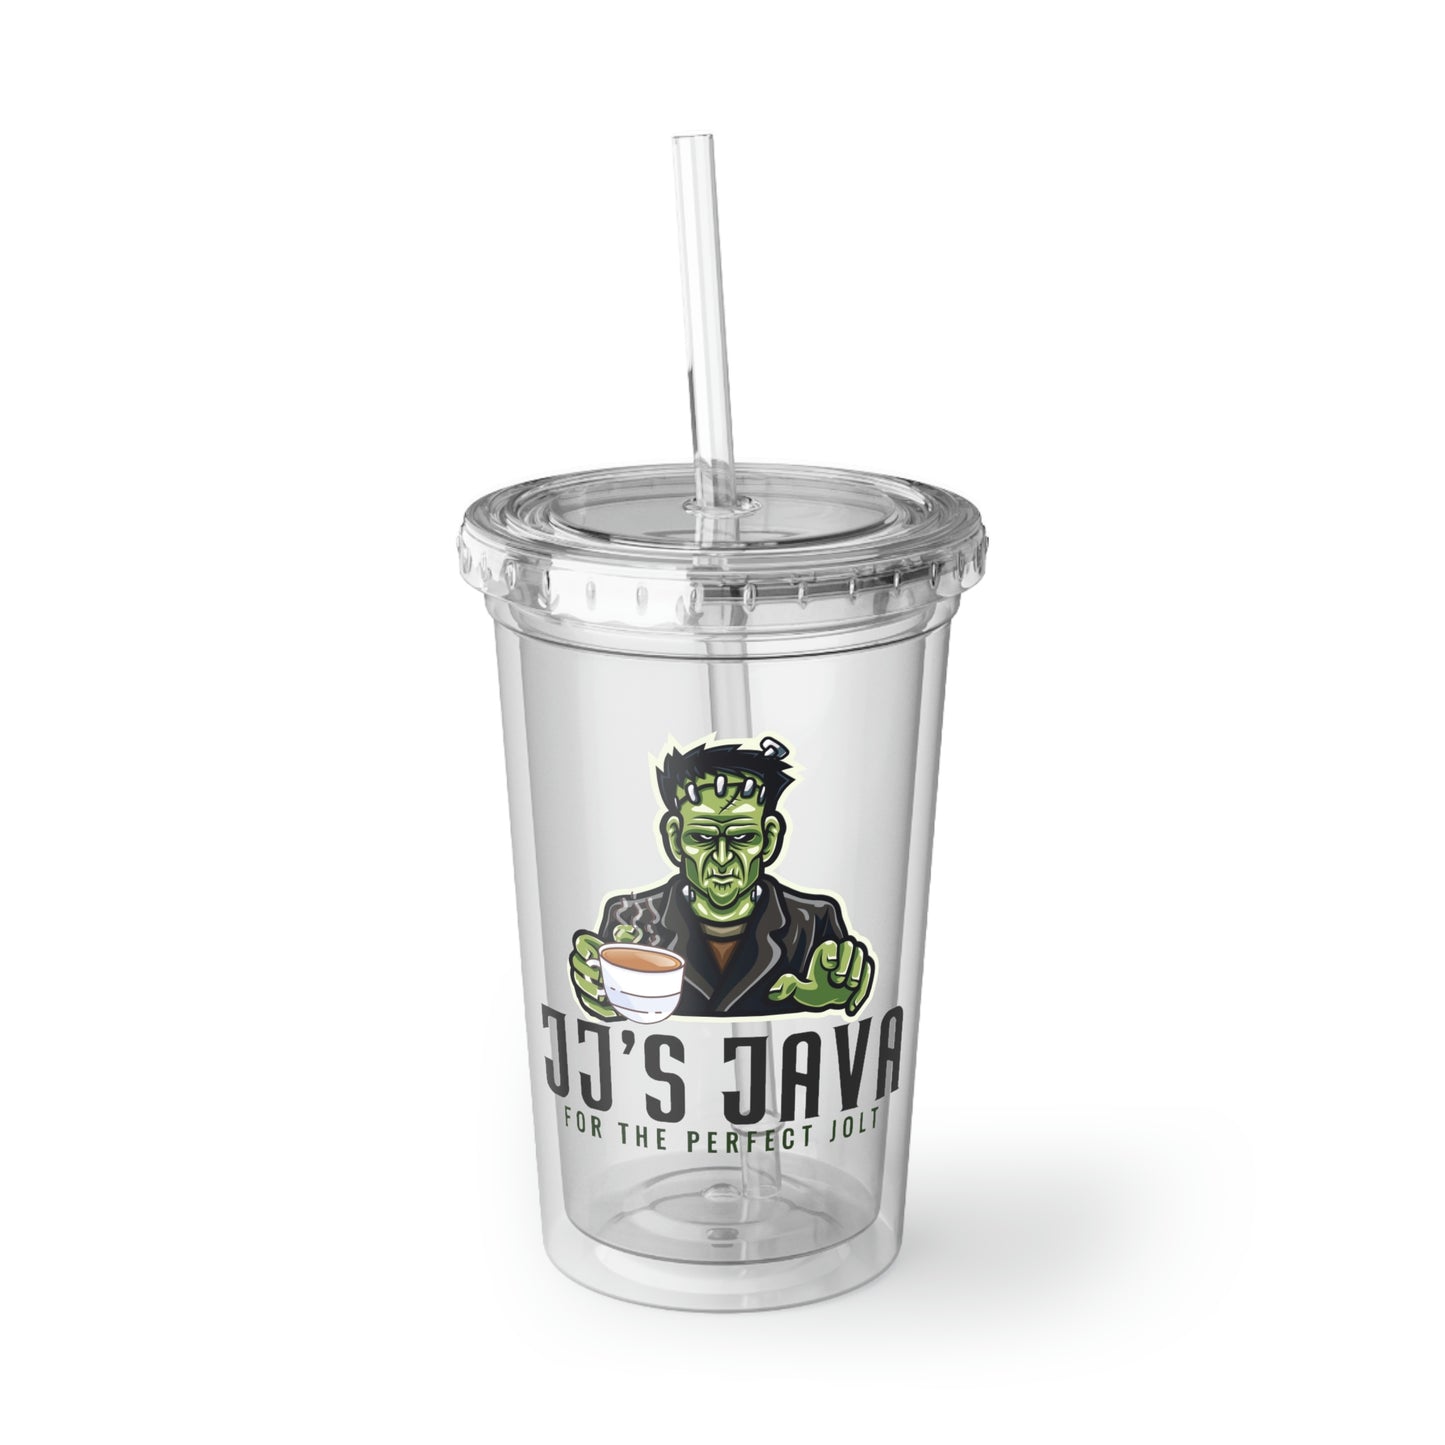 The Perfect Jolt acrylic cup